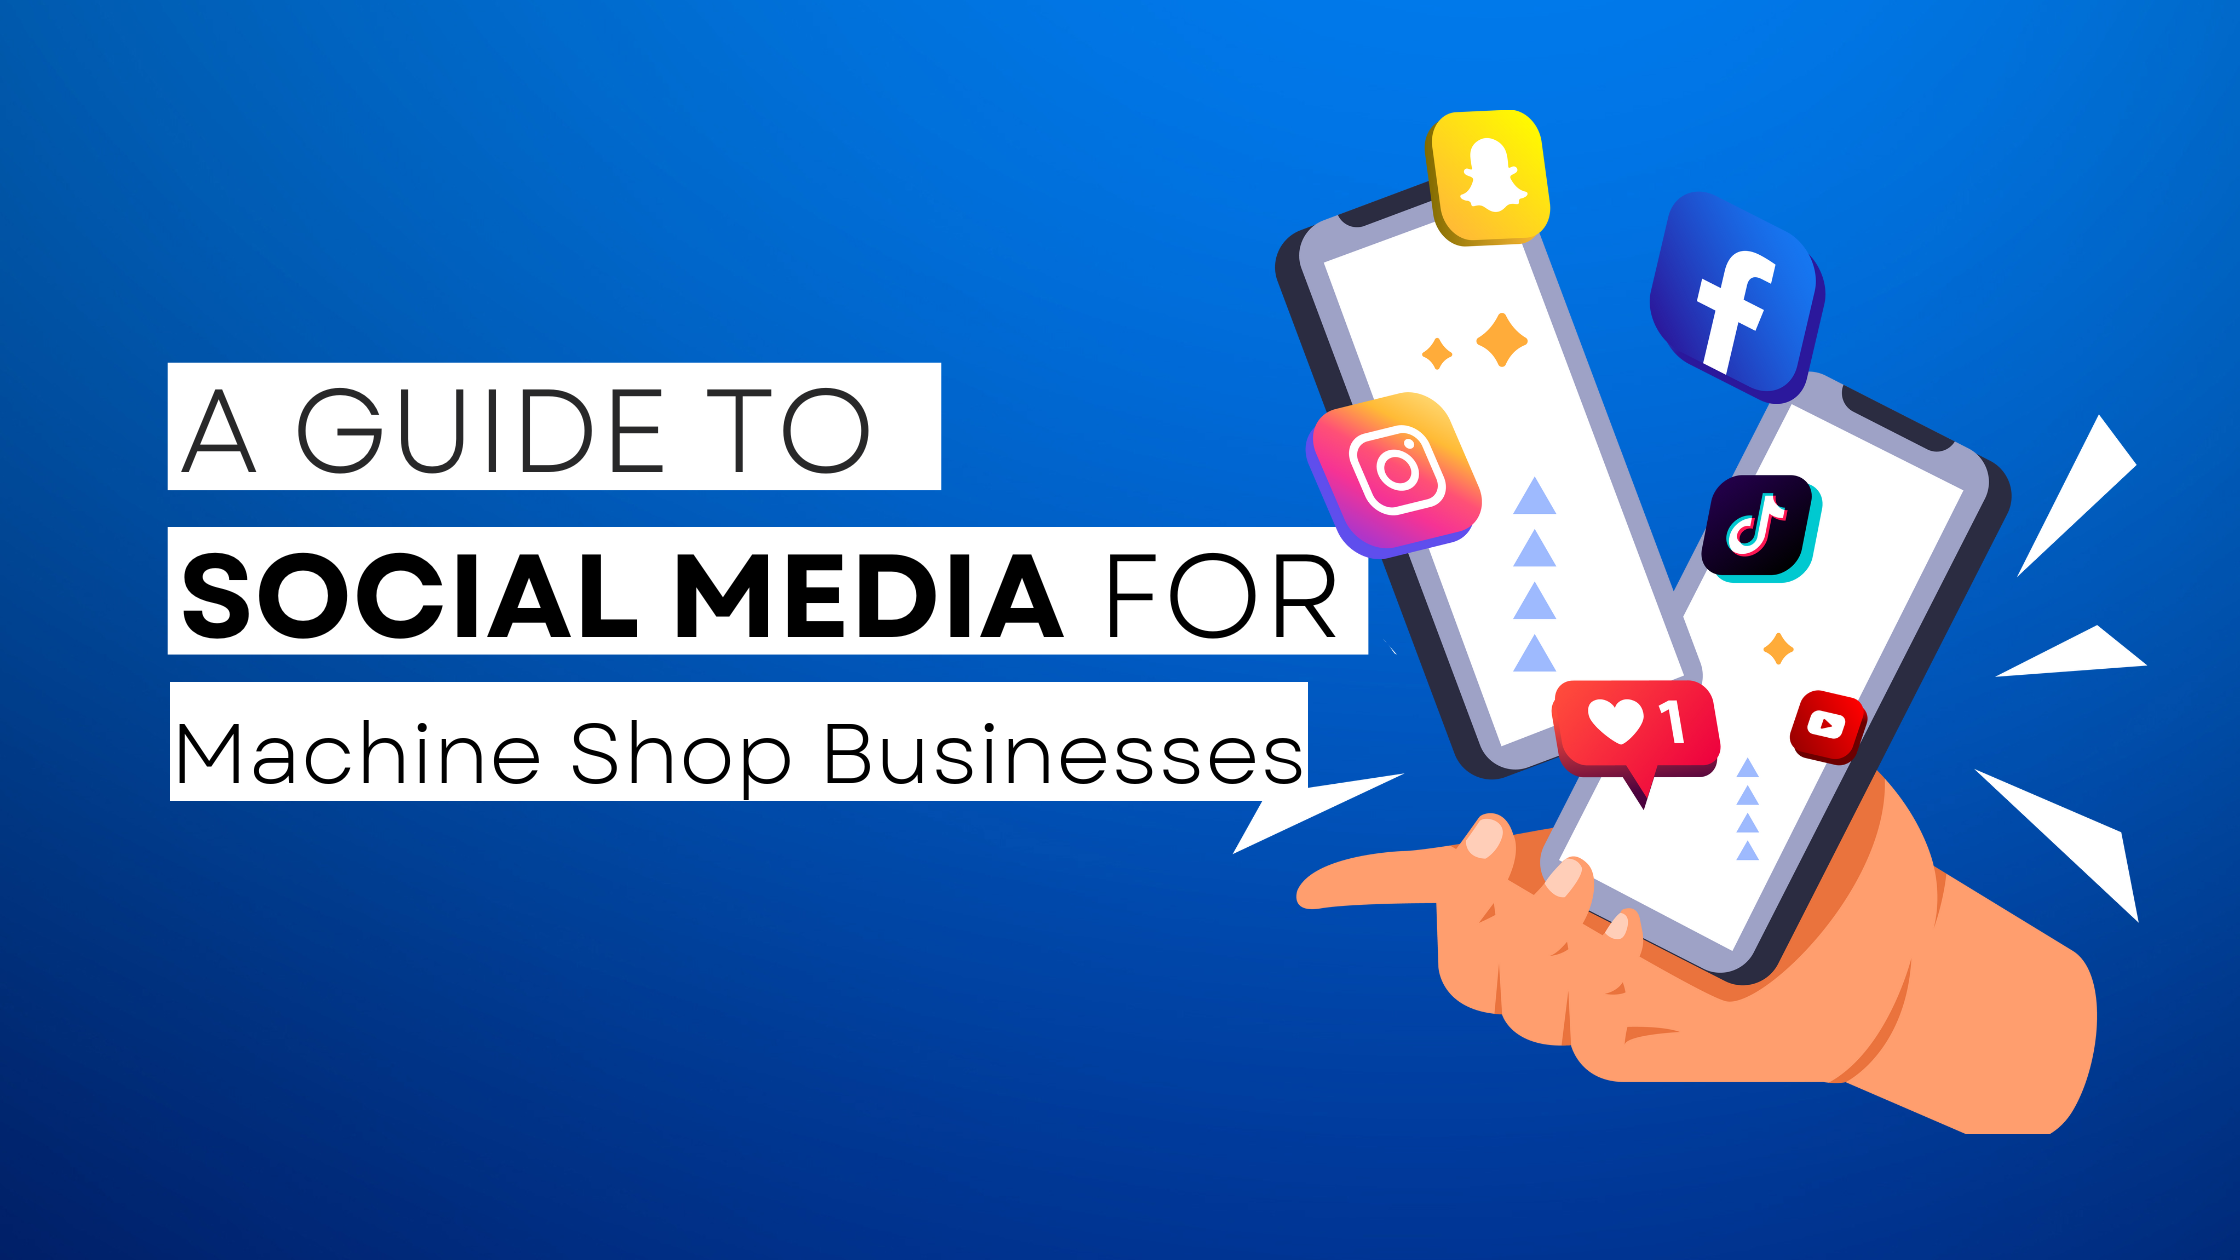 How to start Machine Shop on social media